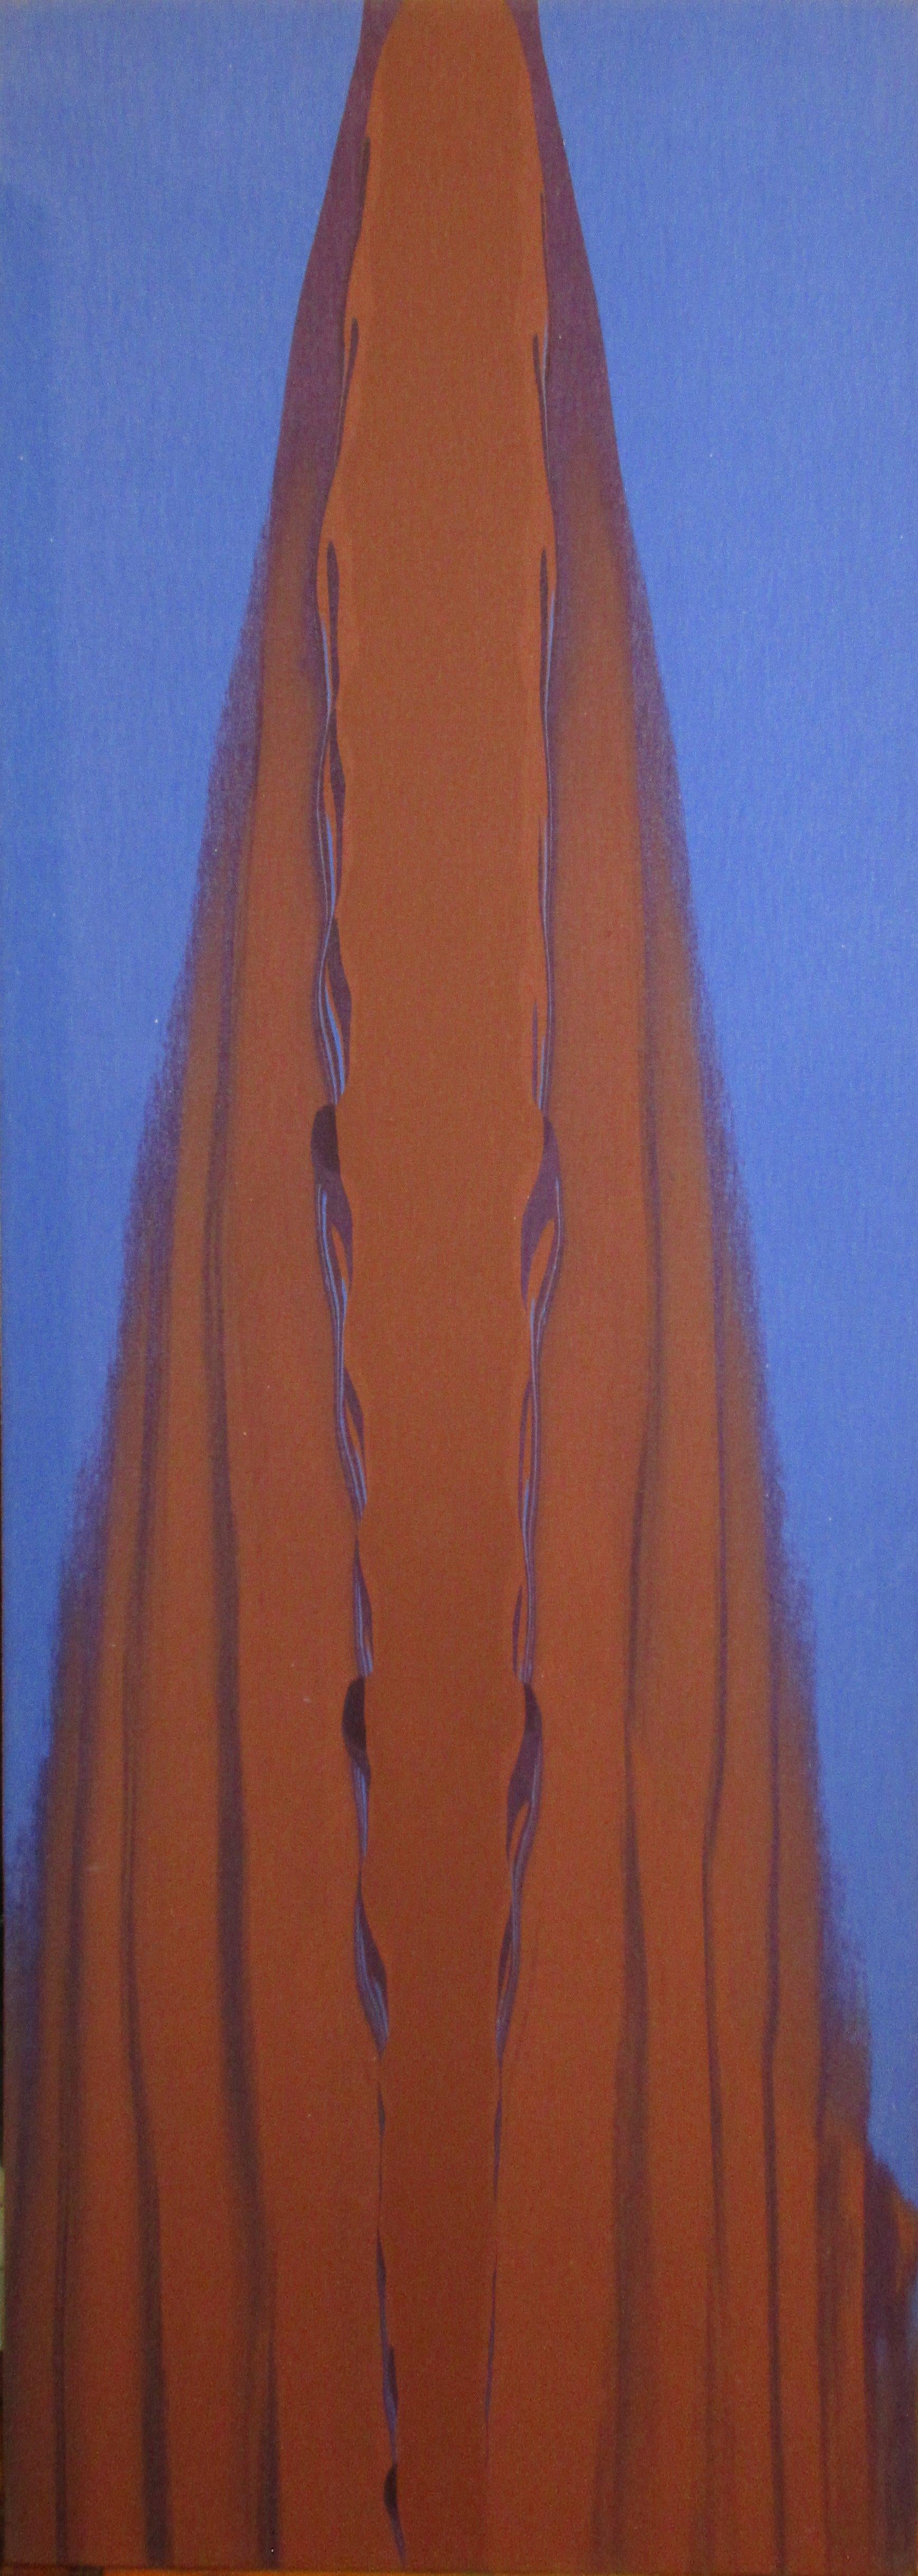 Gene Hedge
Untitled, circa 1970
Acrylic on canvas
48 x 18 inches
(P056)

Gene Hedge was born (1928) and raised in rural Indiana. After military service, he briefly attended Ball State University in Muncie, Indiana. There he encountered the writing